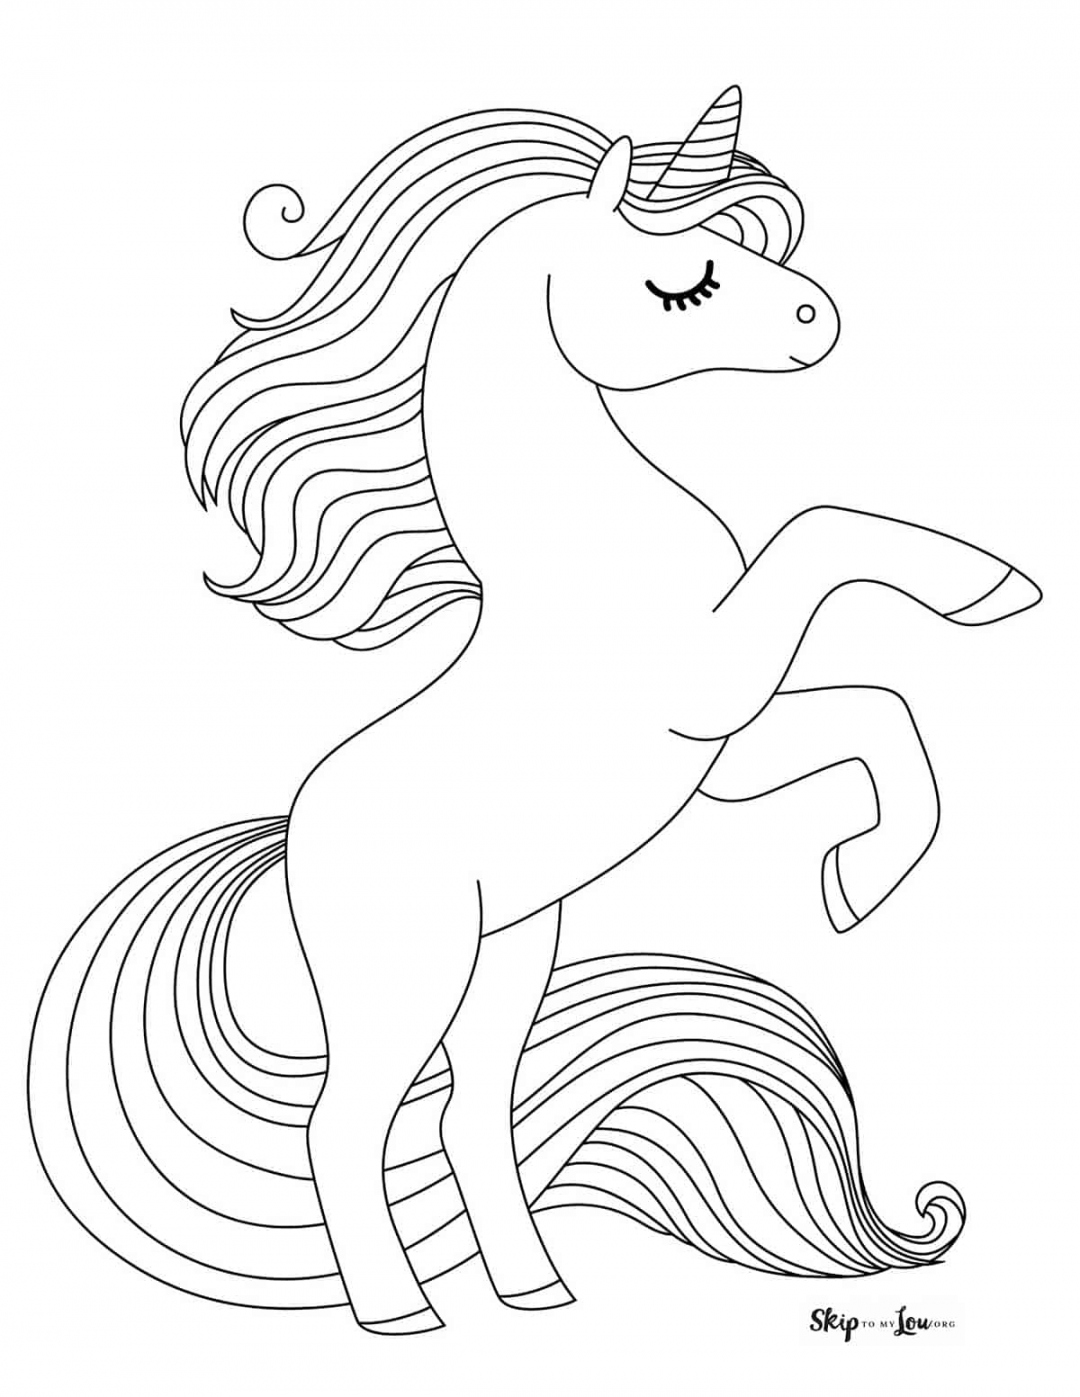 Unicorn Coloring Pages Printable Free - Printable -  Magical Unicorn Coloring Pages Print for Free  Skip To My Lou